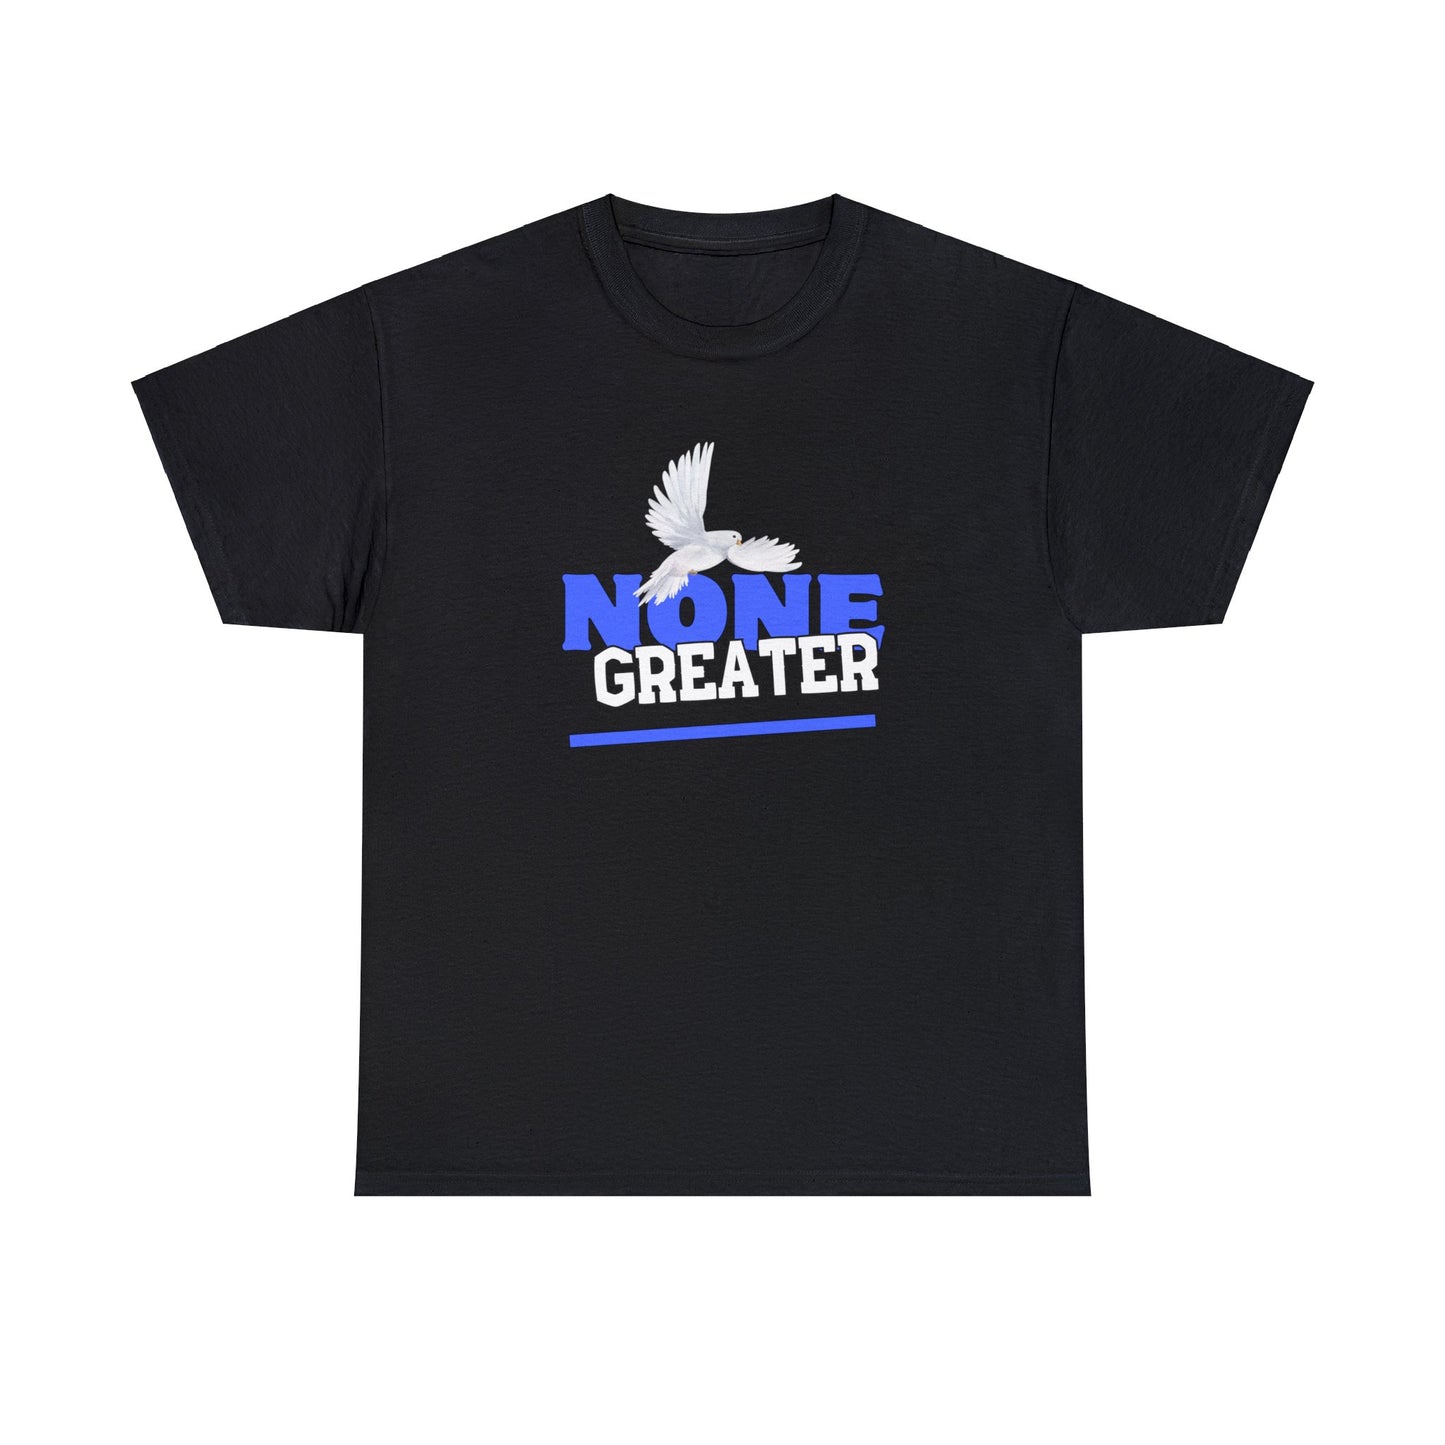 Black Unisex Heavy Cotton Tee w/White Dove , Royal Blue and White Letters saying "None Greater"      